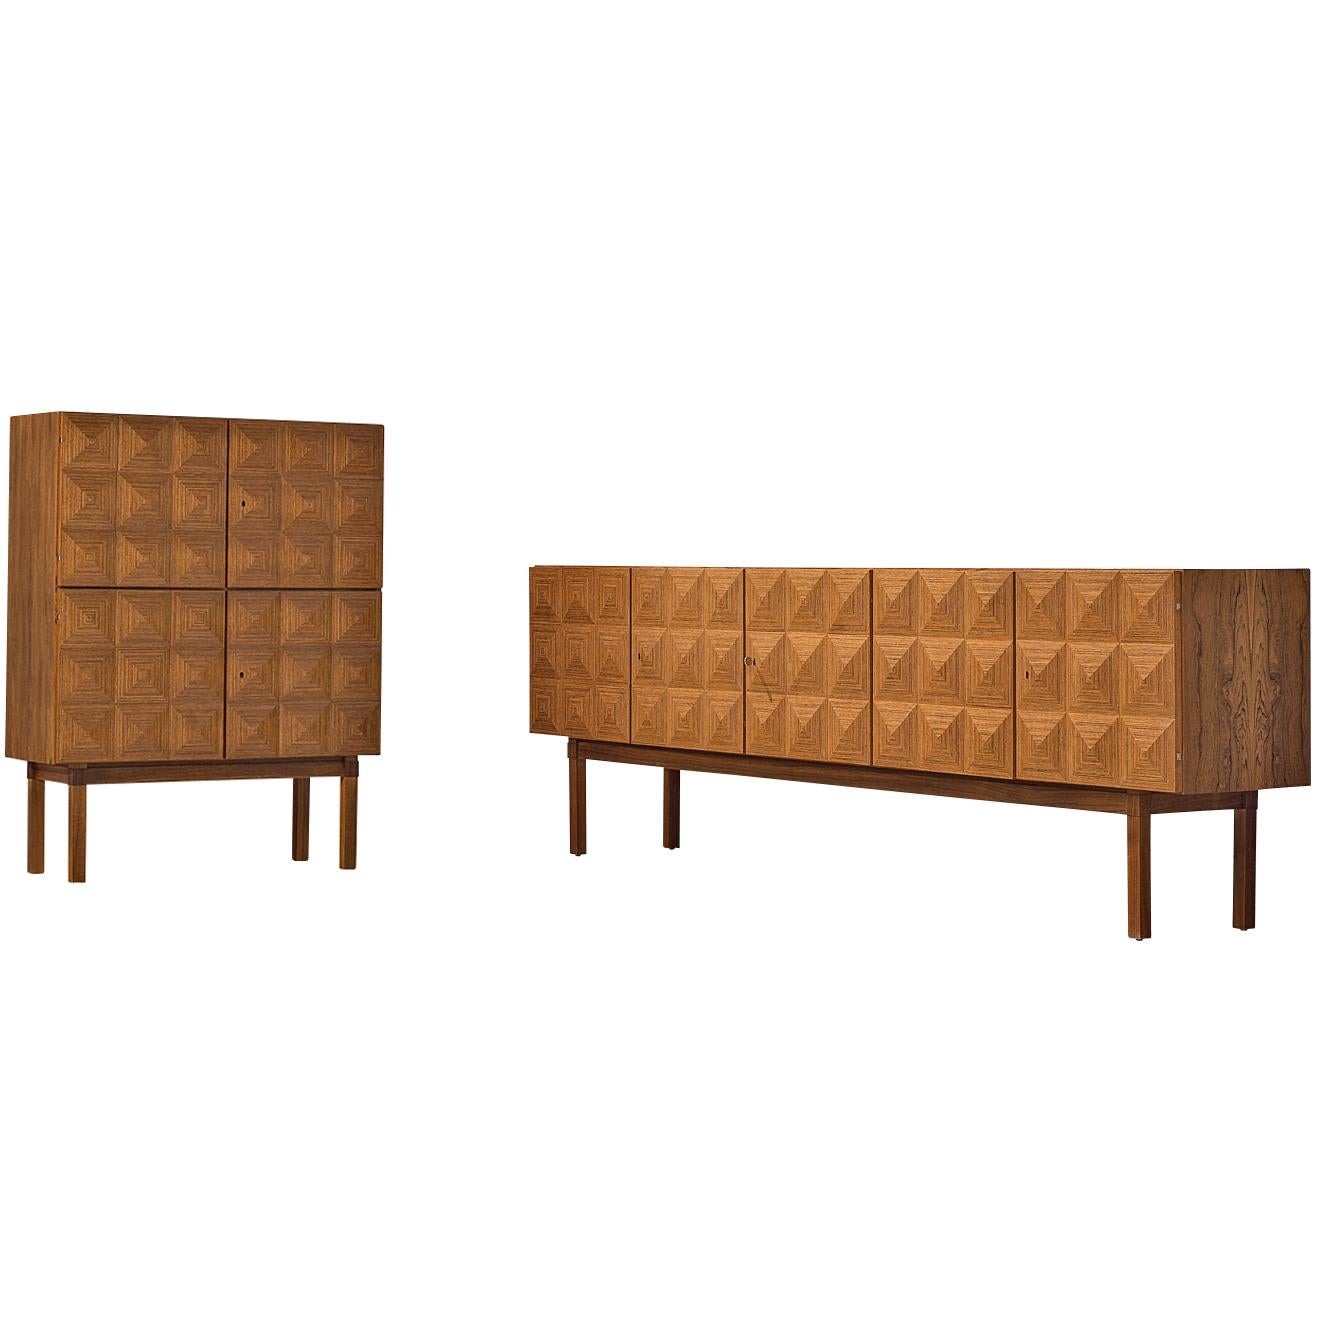 Franz Meyer, Set of Highboard and Sideboard, Rosewood, Germany, 1960s